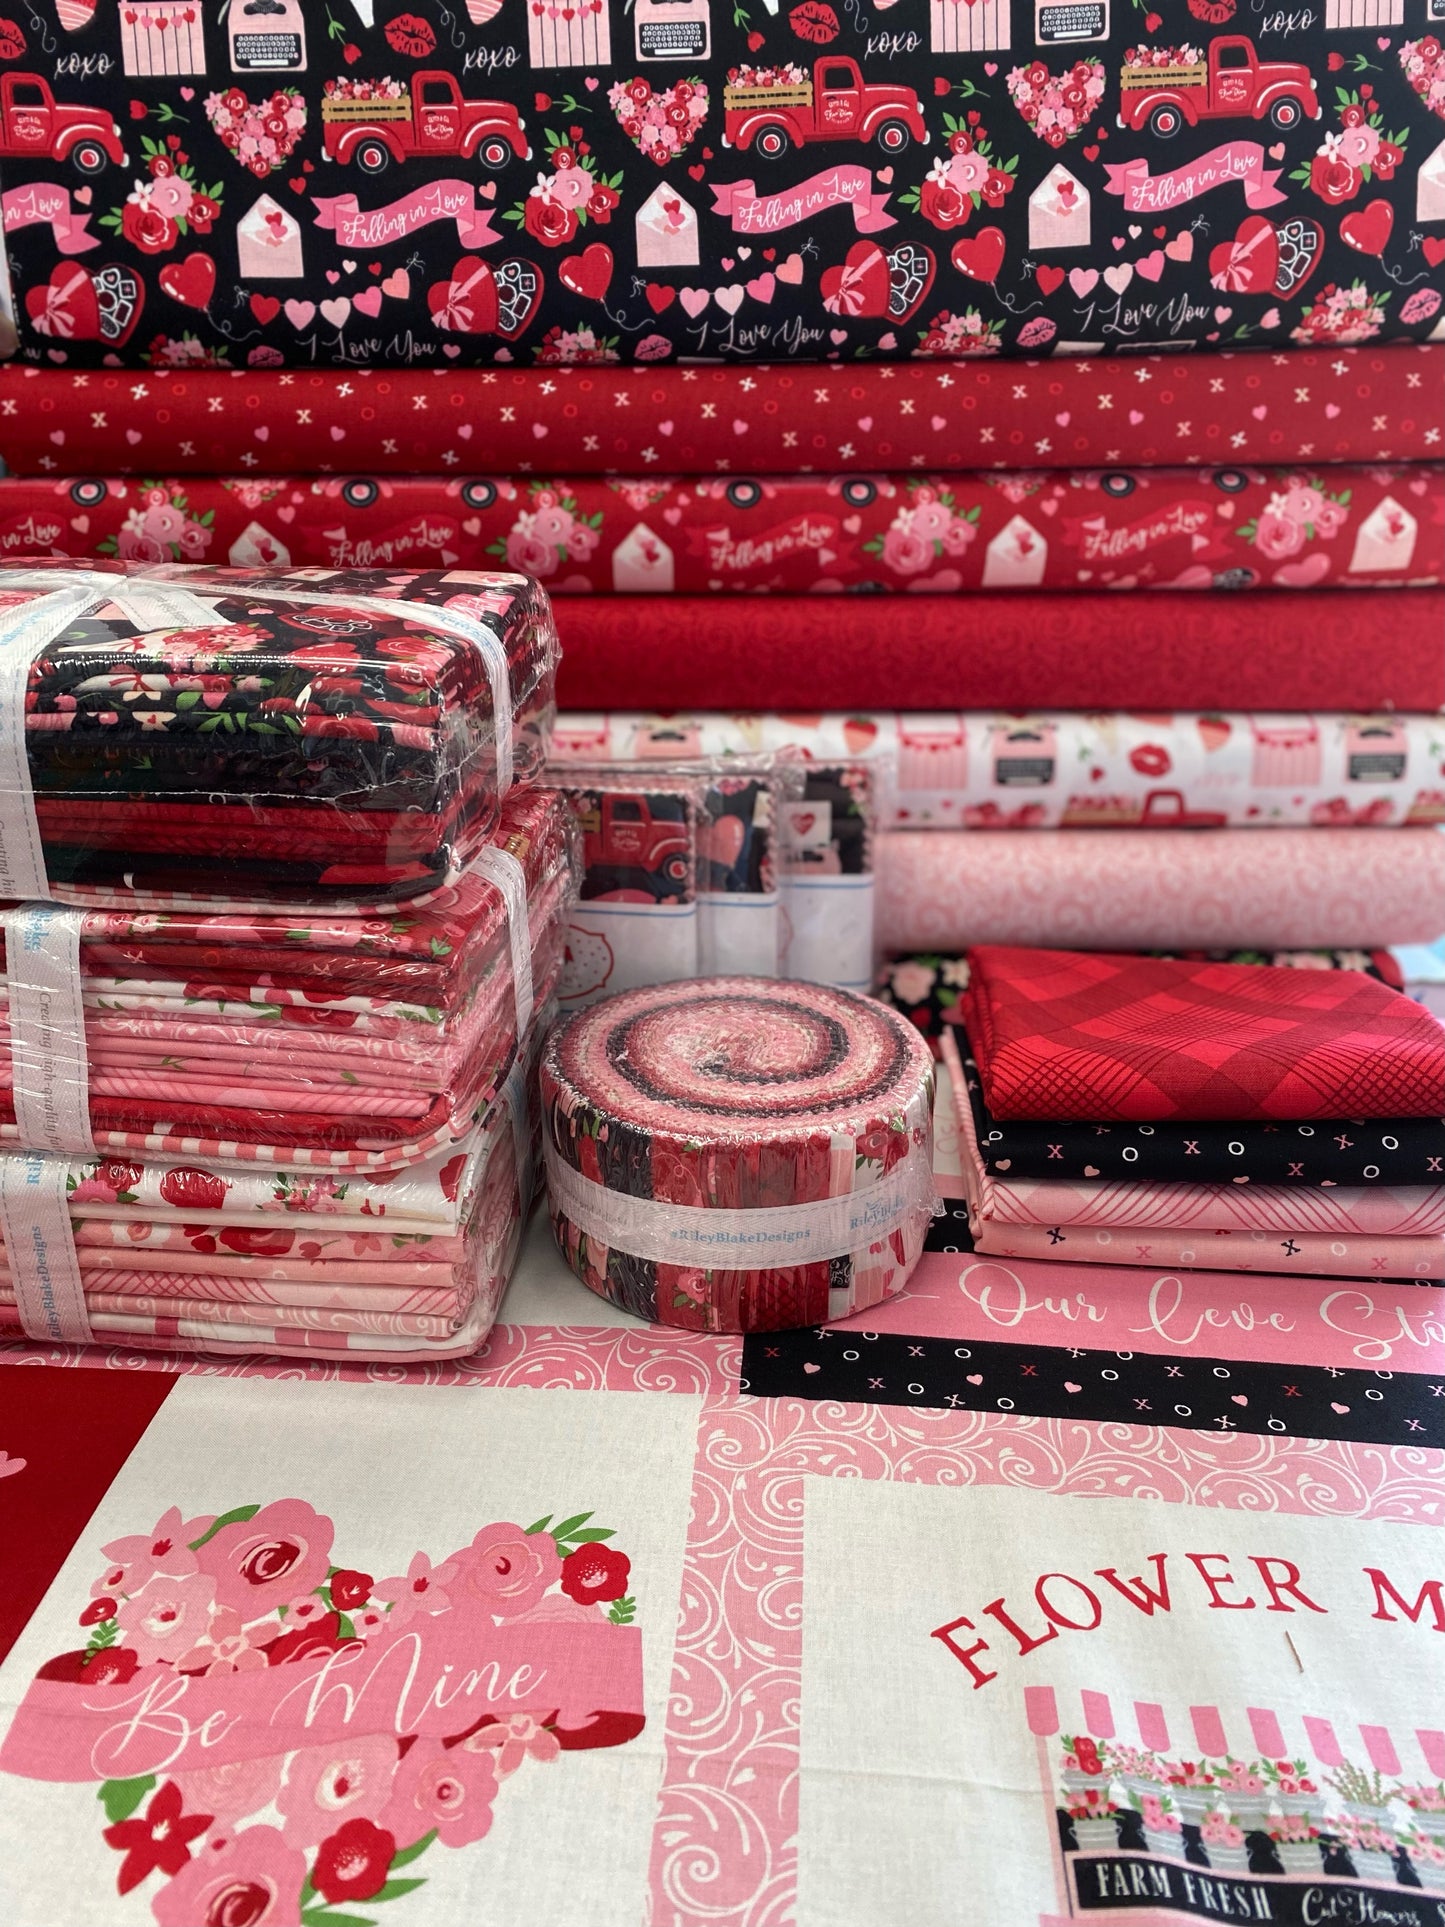 Falling in Love by Dani Mogstad 1-Yard Bundle Red includes 6 yards and 2 panels  1YD-11280R-8 Bundle